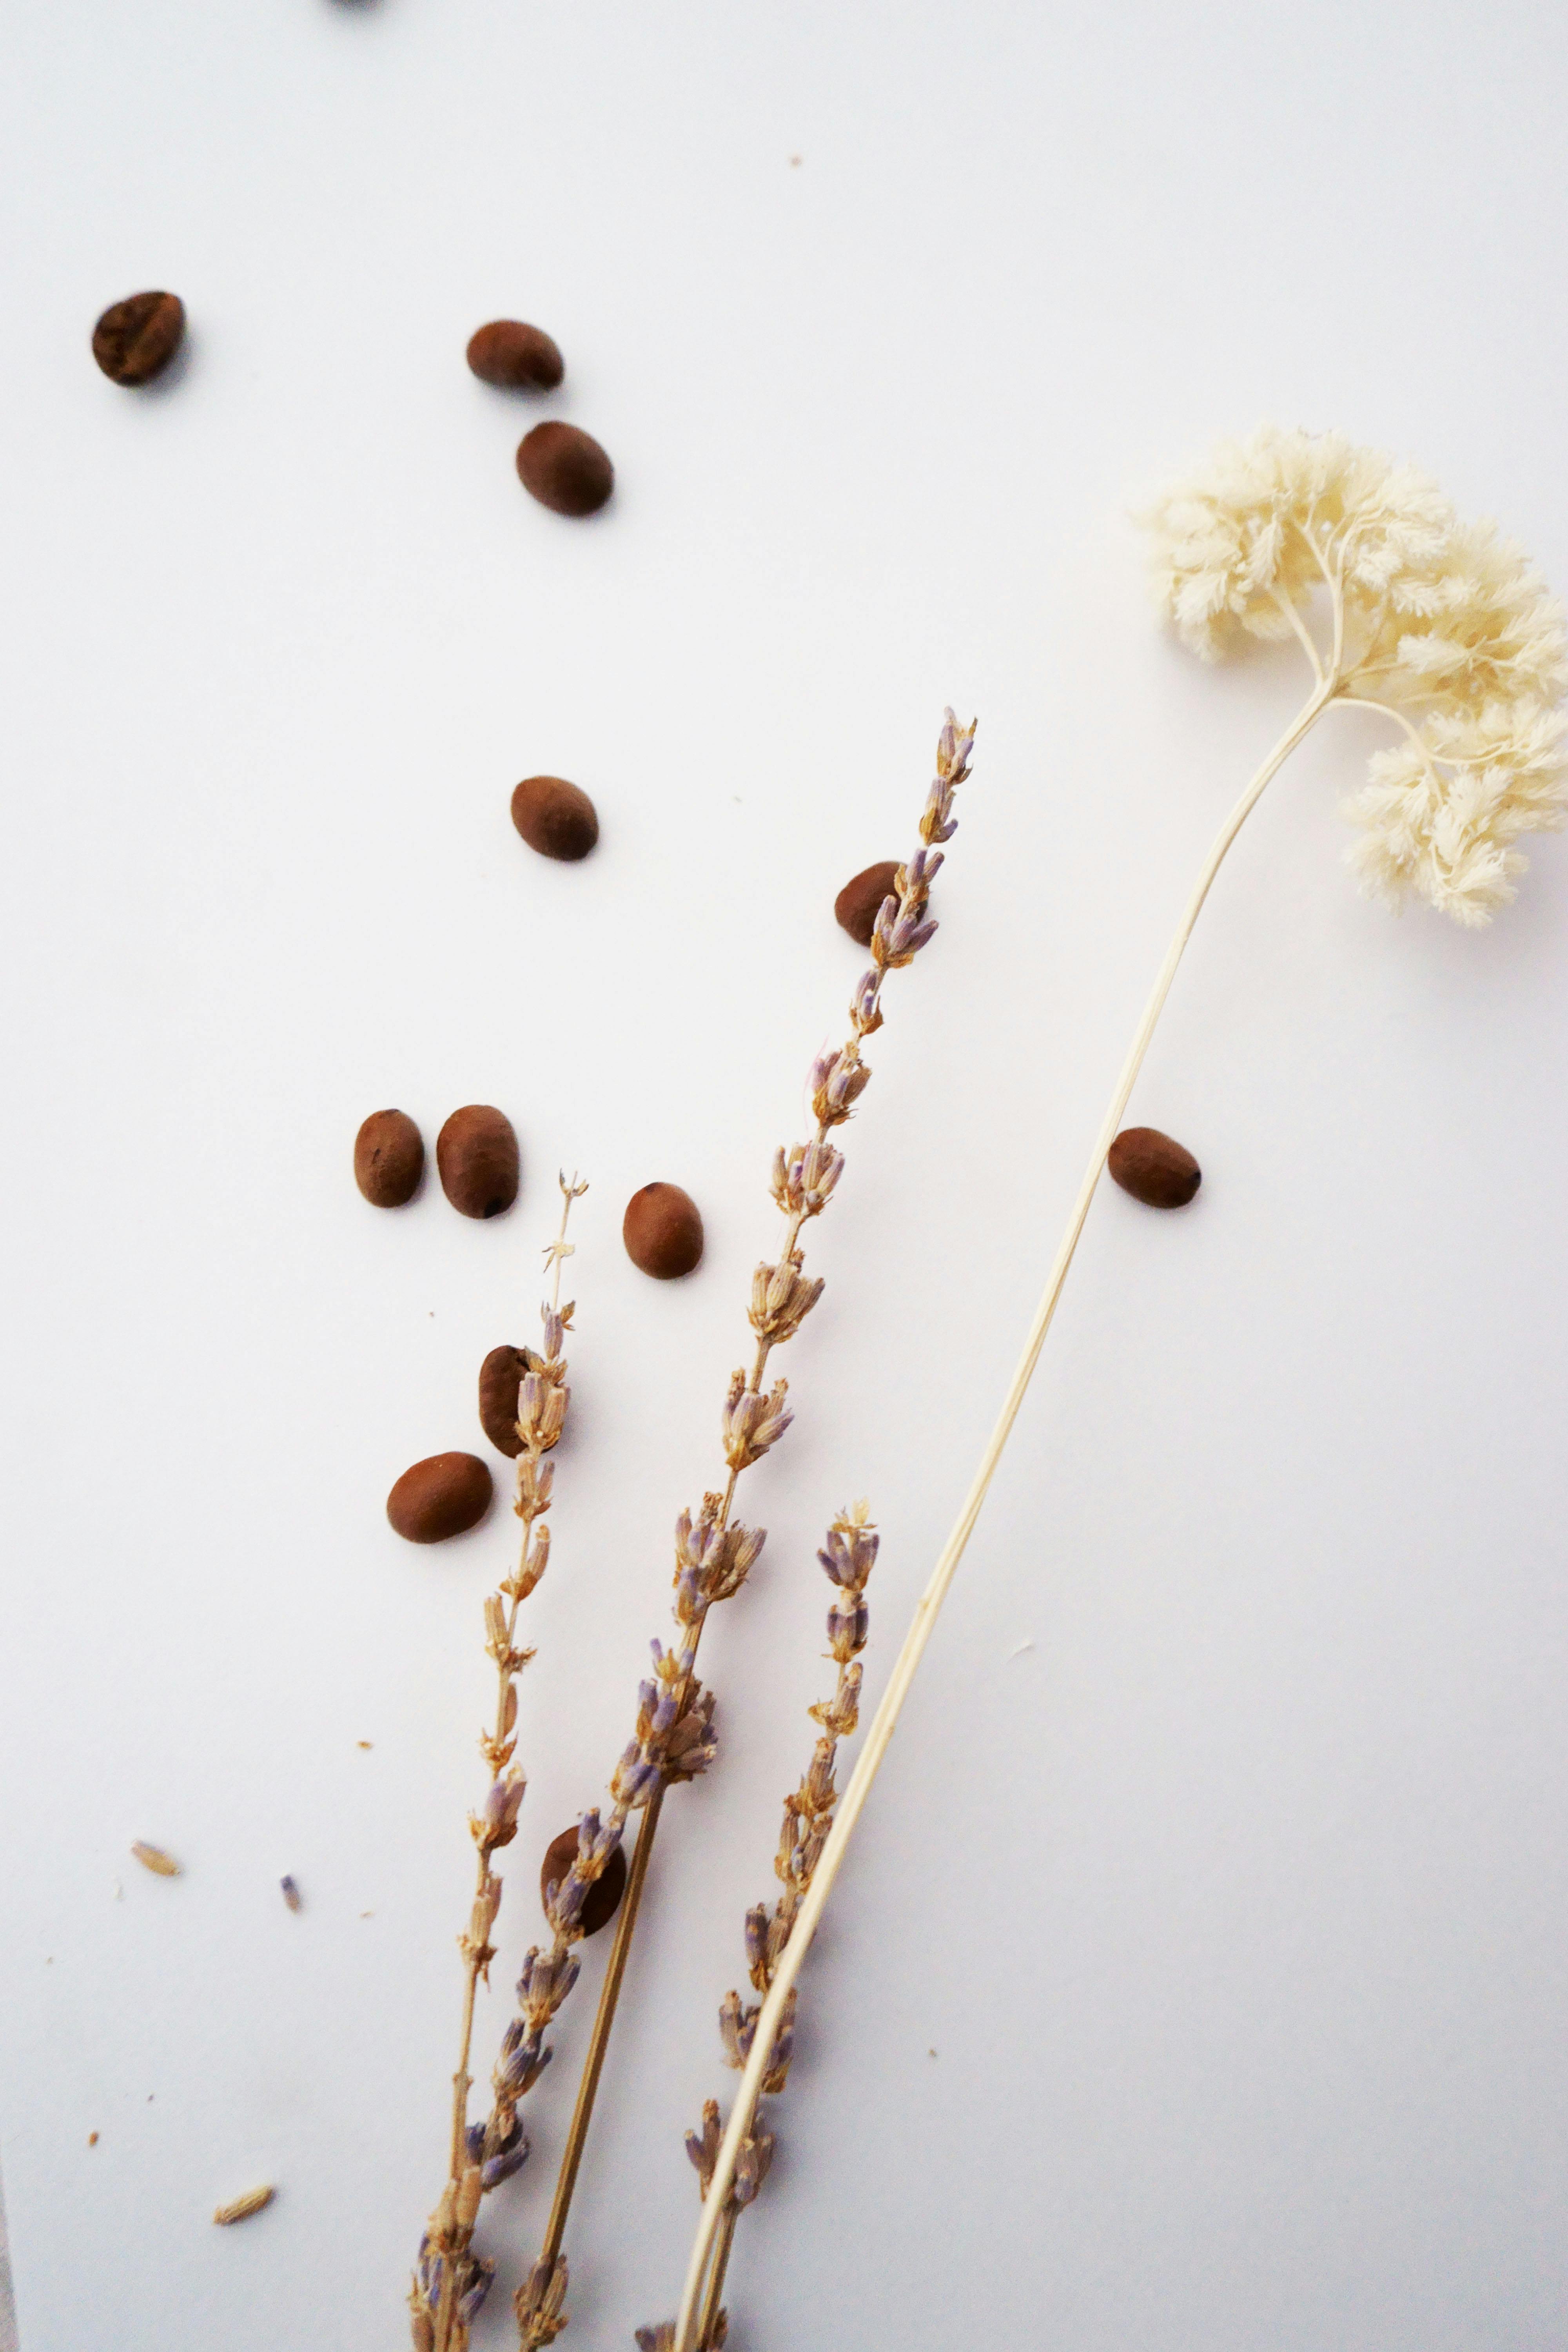 Free stock photo of coffee beans, dried flowers, dried lavender